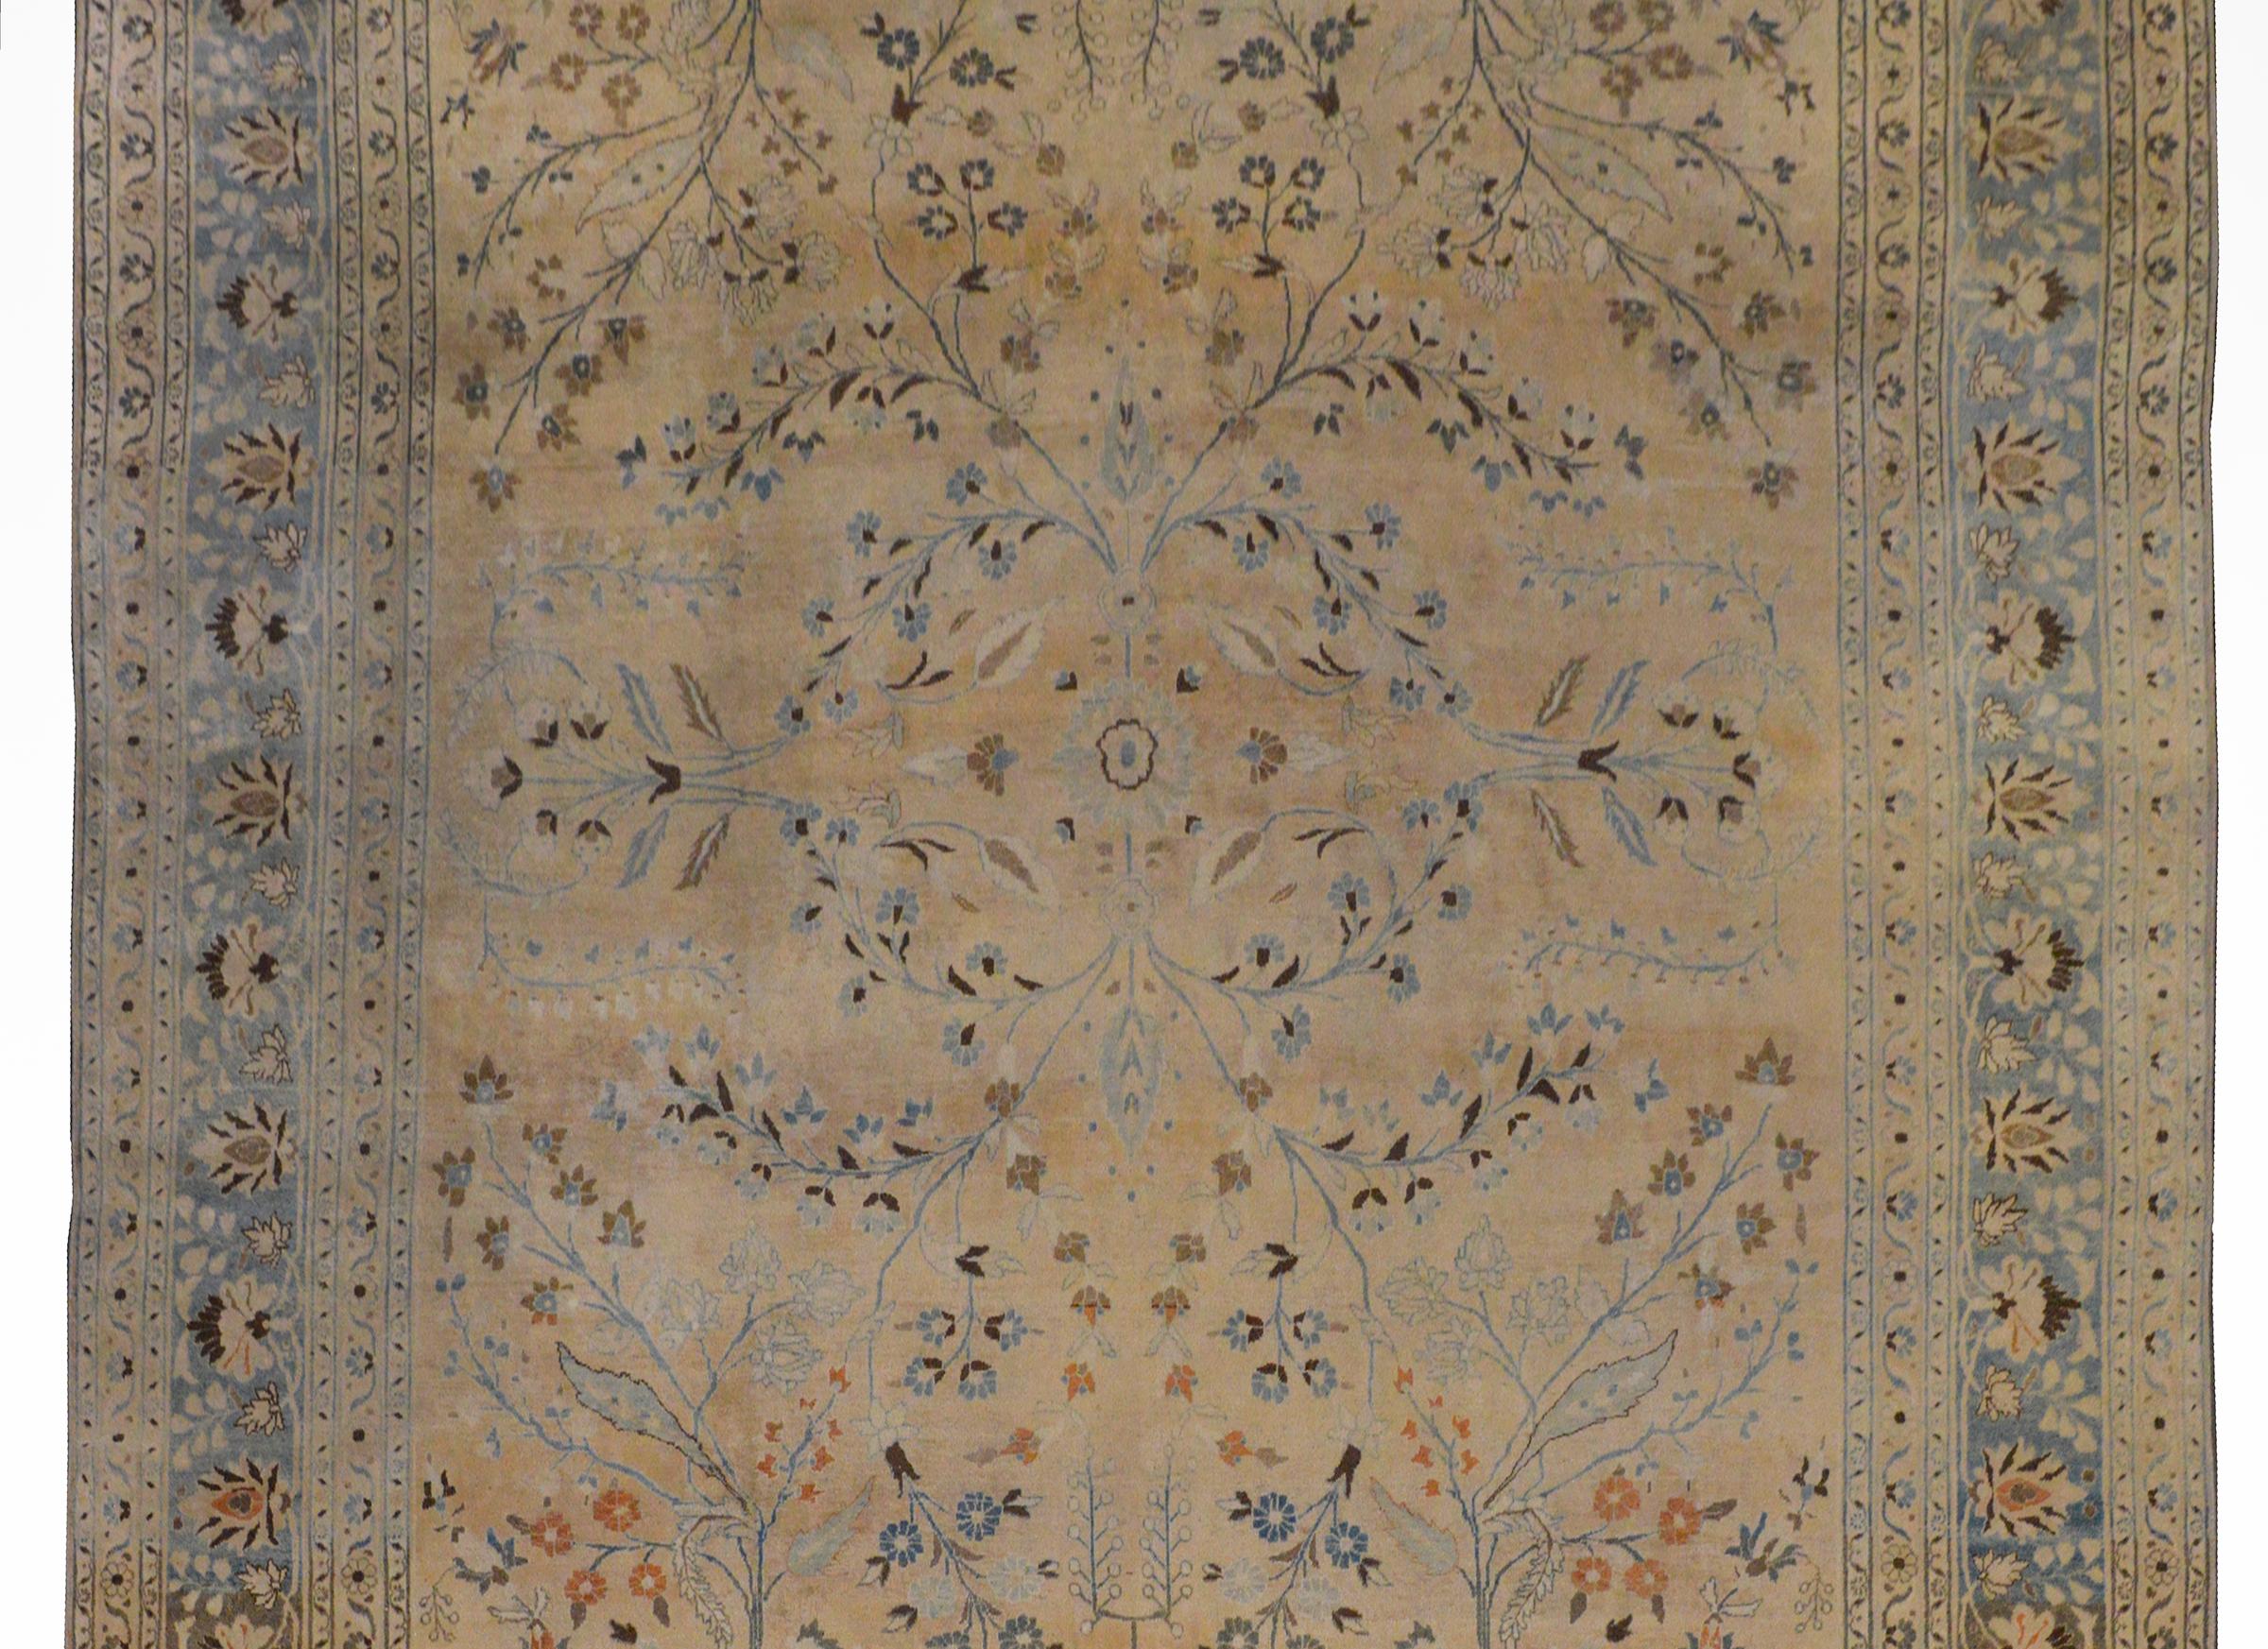 An exquisite early 20th century Persian Tabriz rug with an incredible and striking delicately woven mirrored tree-of-life pattern woven in light and dark indigo, brown, taupe, and orange vegetable dyed wool on a gorgeous champagne colored ground.